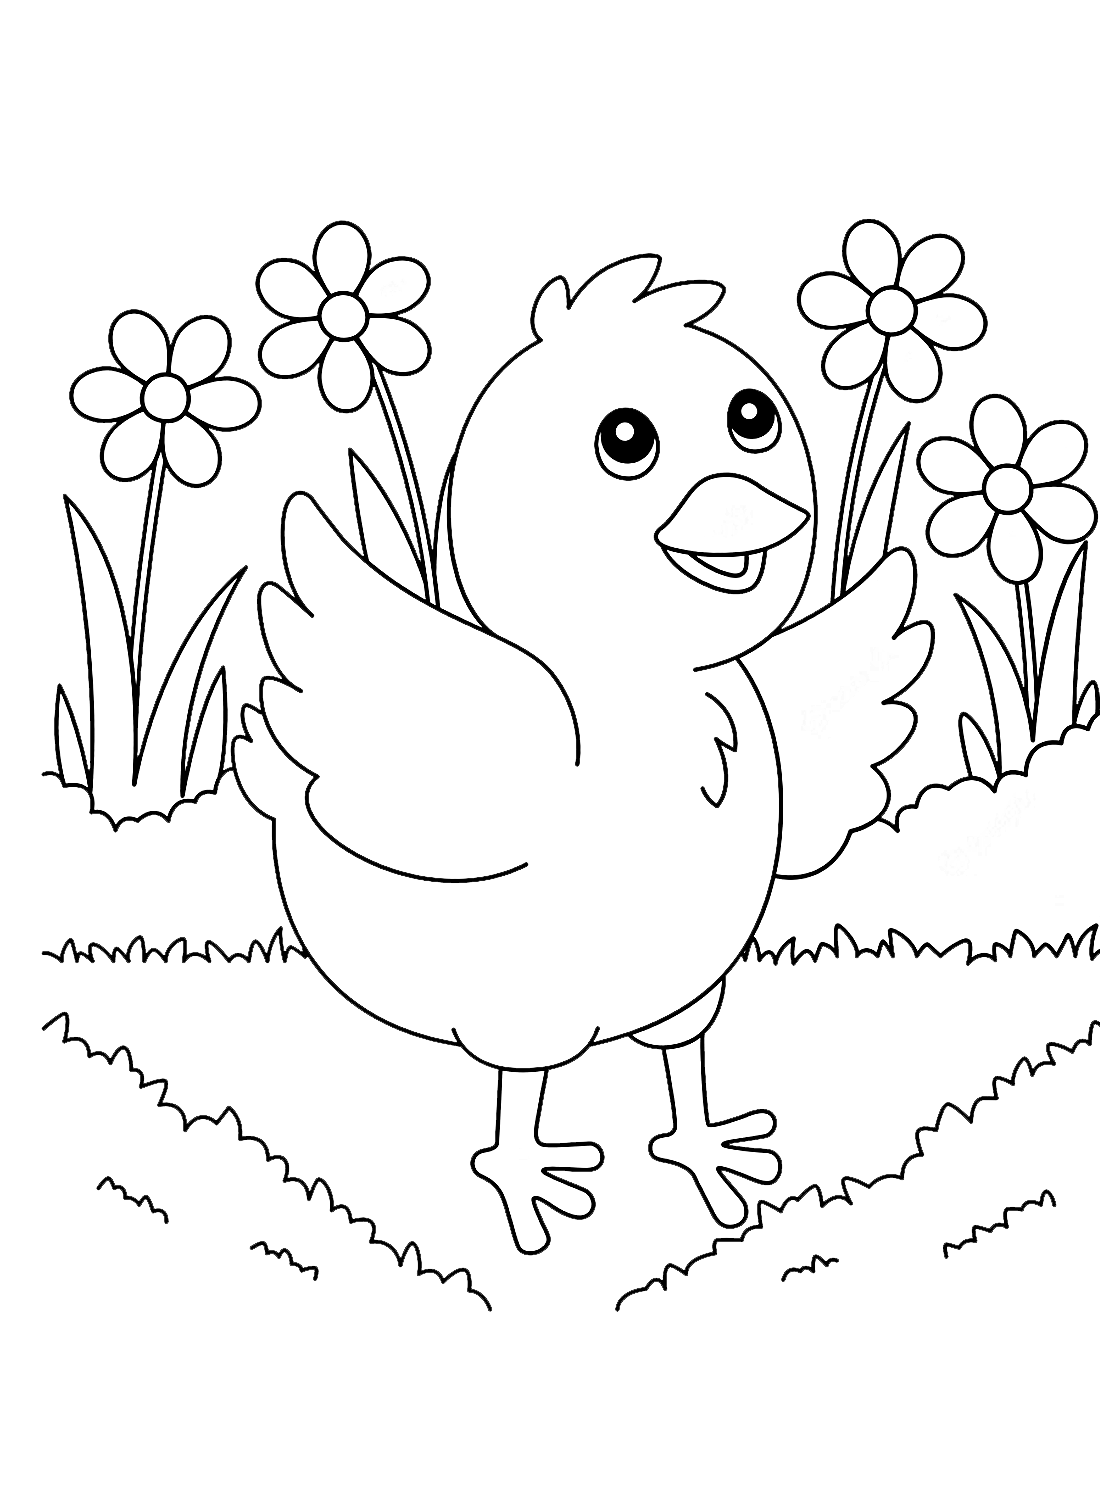 A chick and flowers from Chick